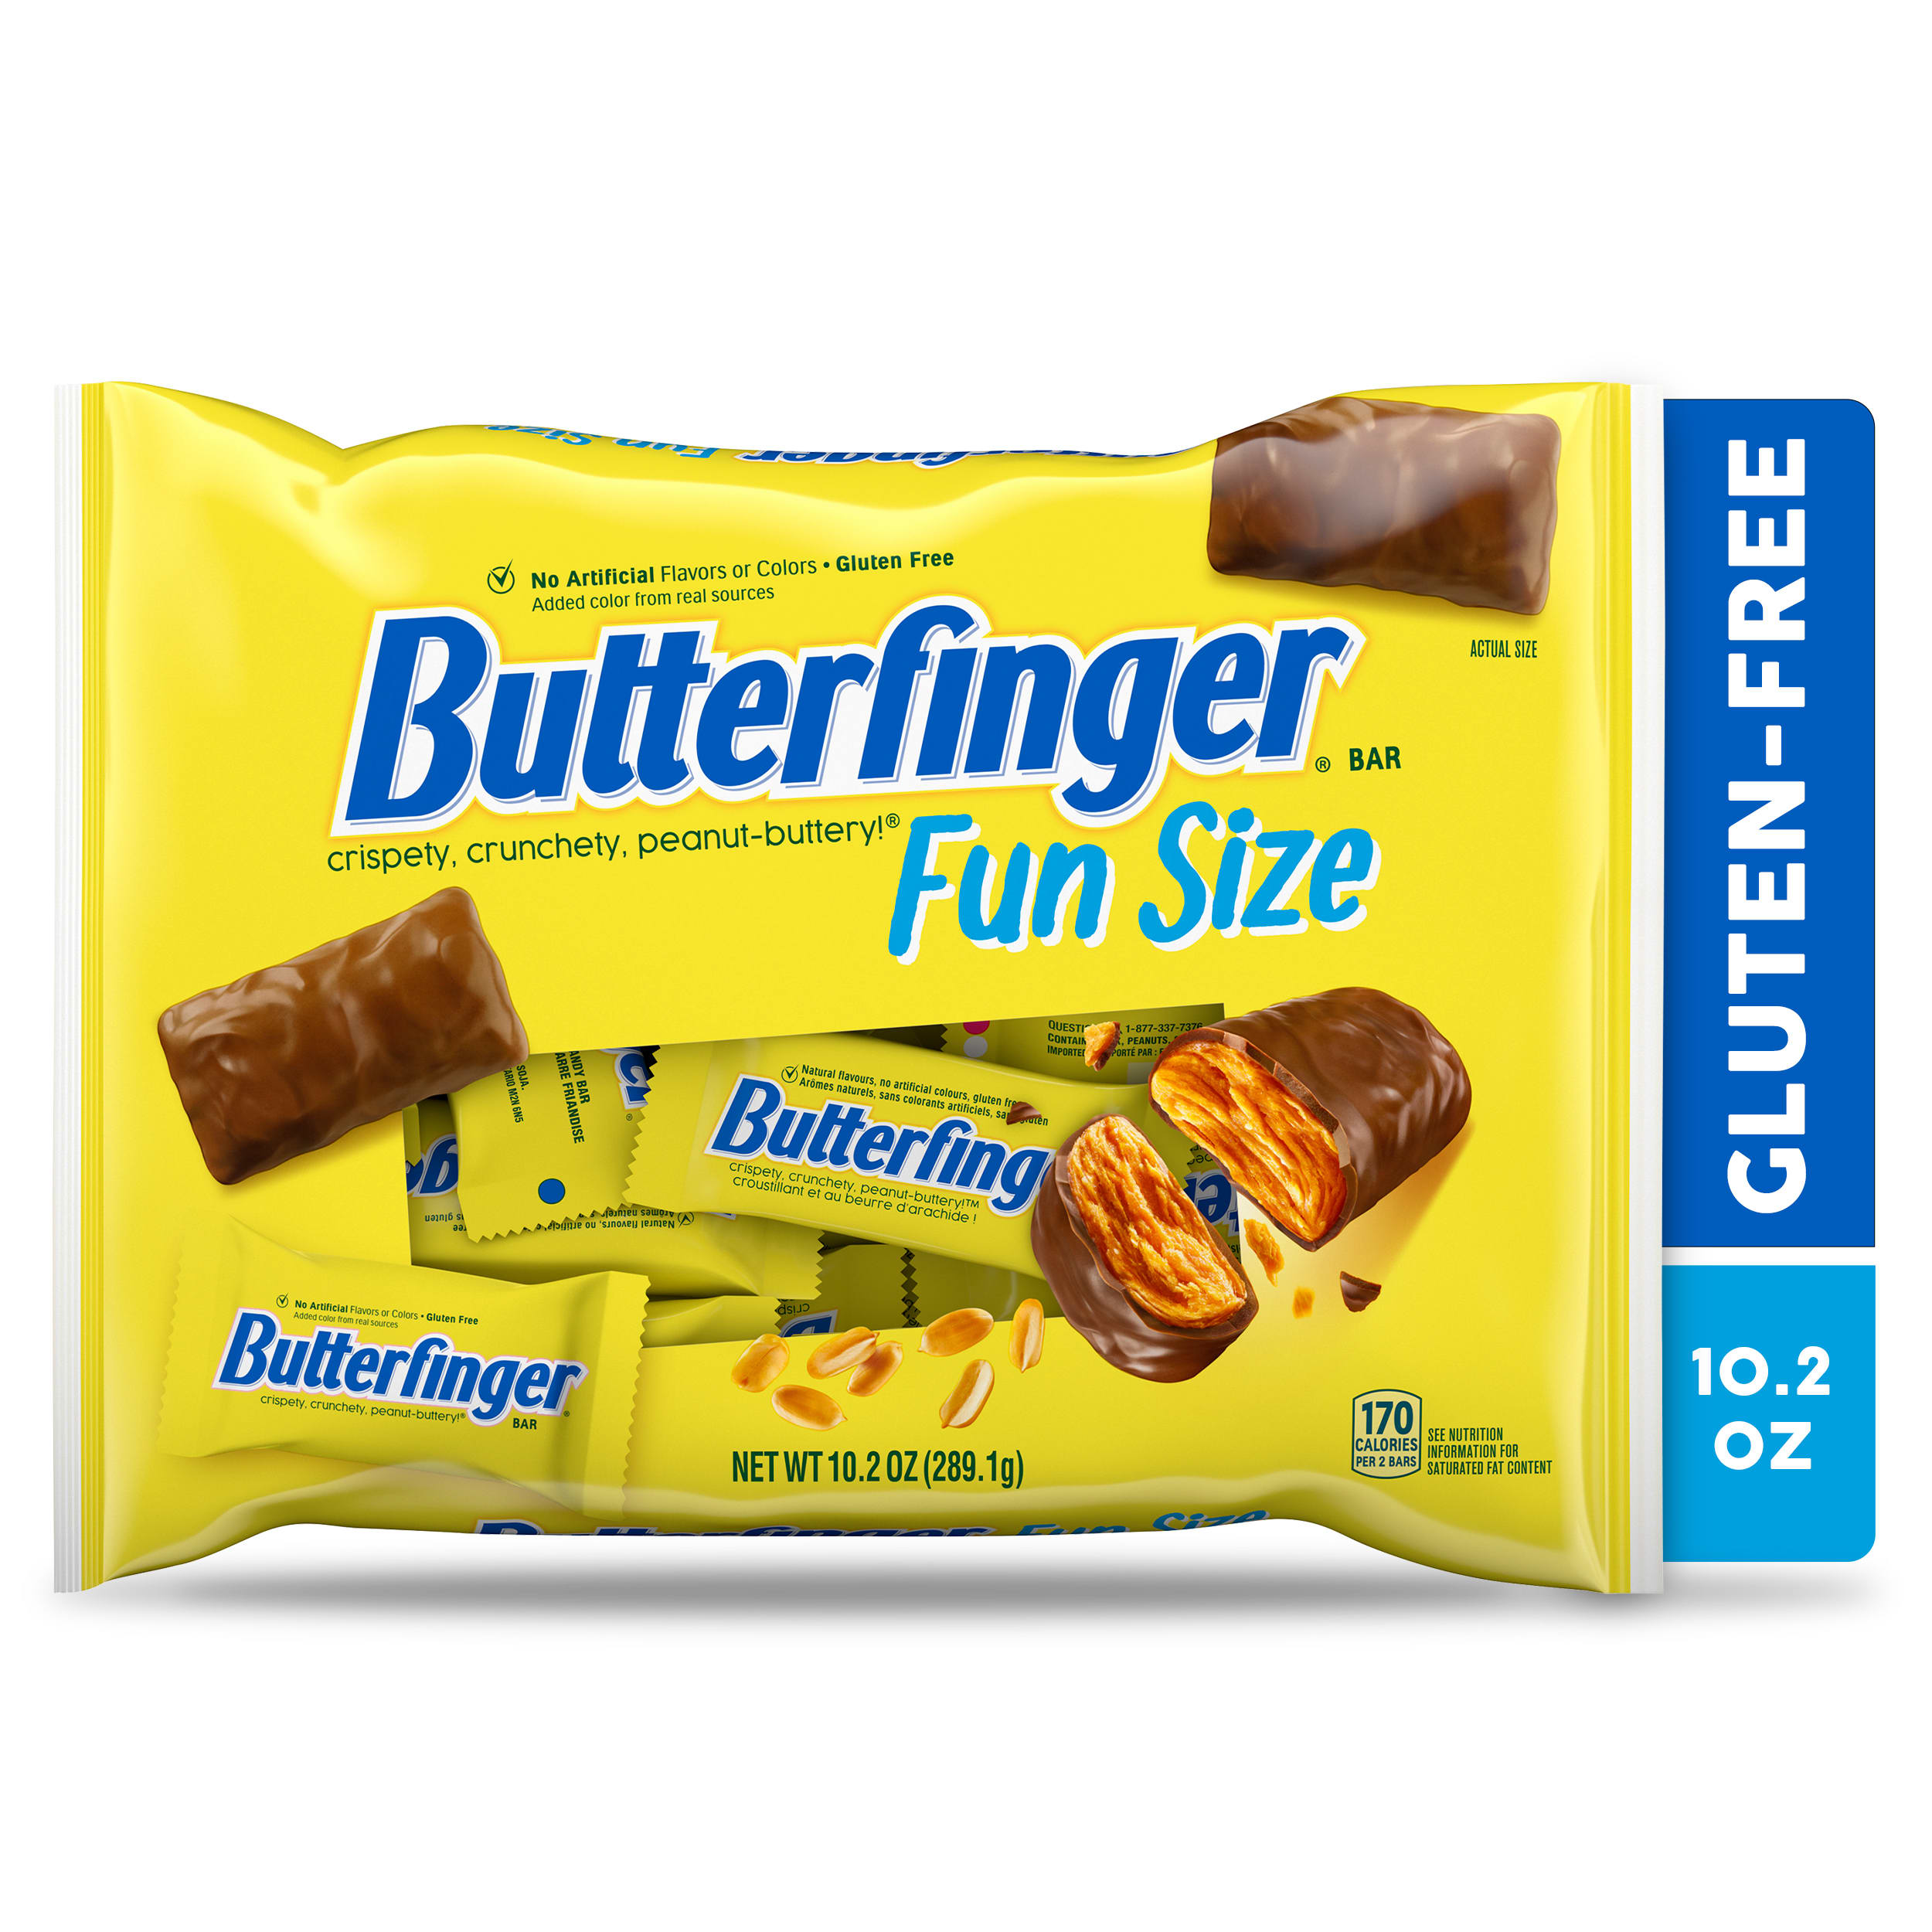 Butterfinger, Chocolatey, Peanut-Buttery, Fun Size Candy Bars, 10.2 oz - image 1 of 11